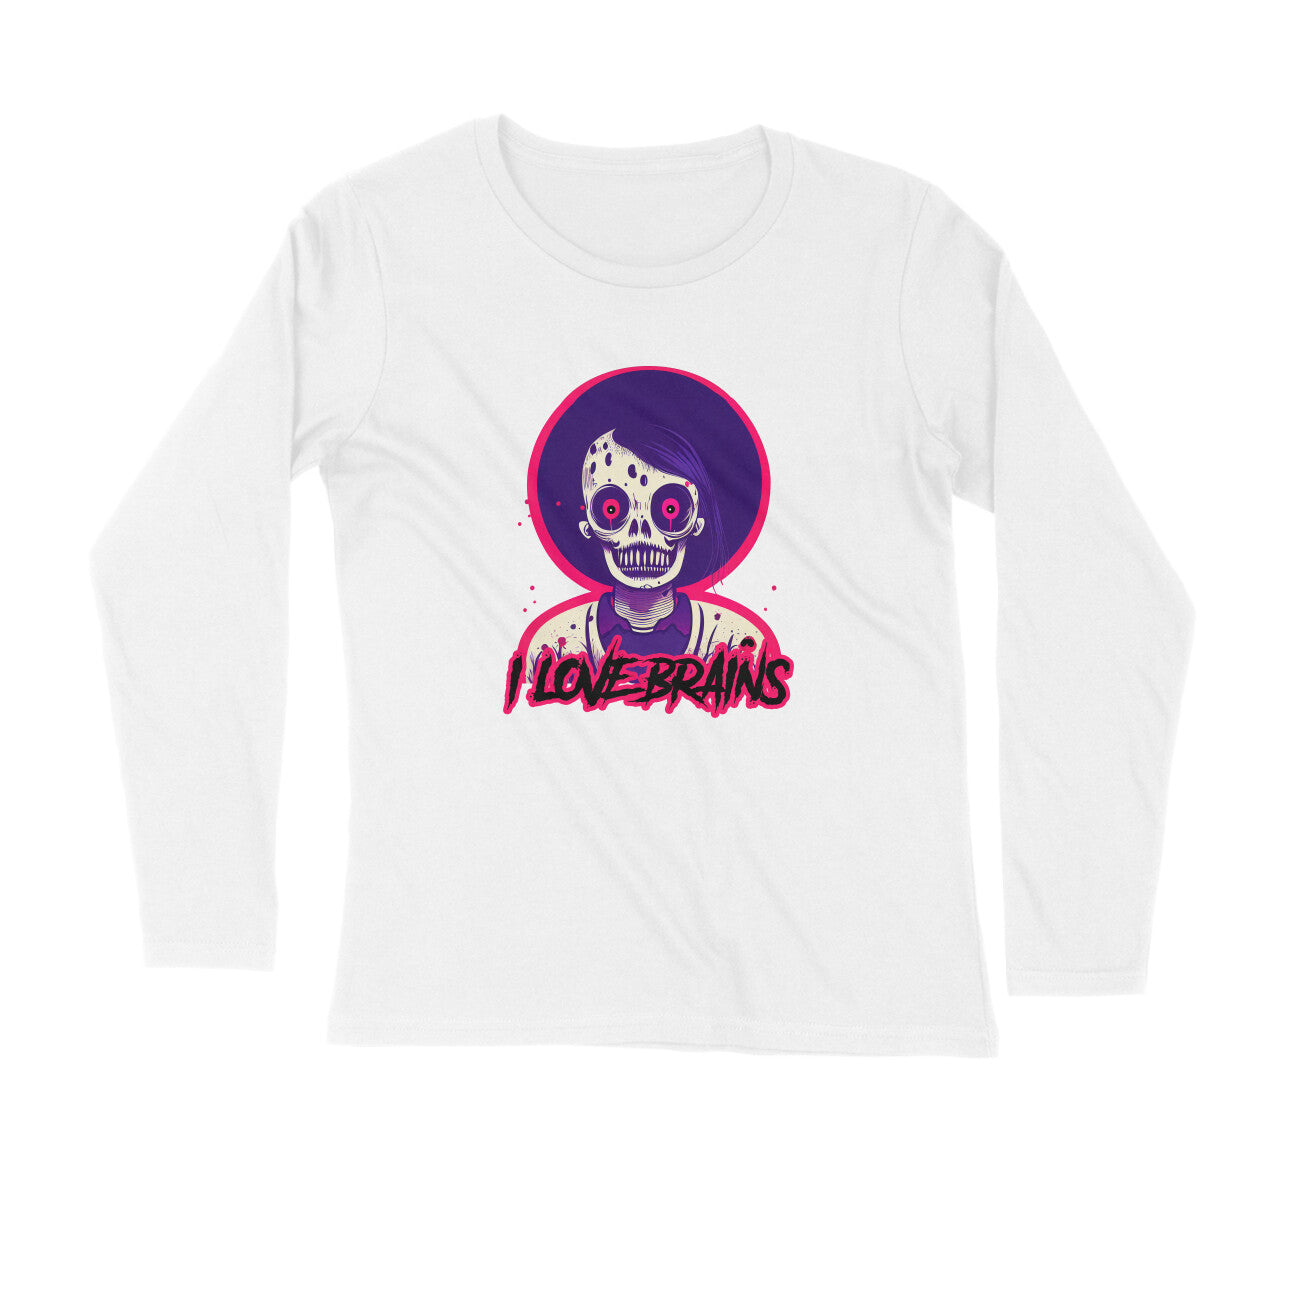 Zombies and monsters Printed Full Sleeves T-Shirt